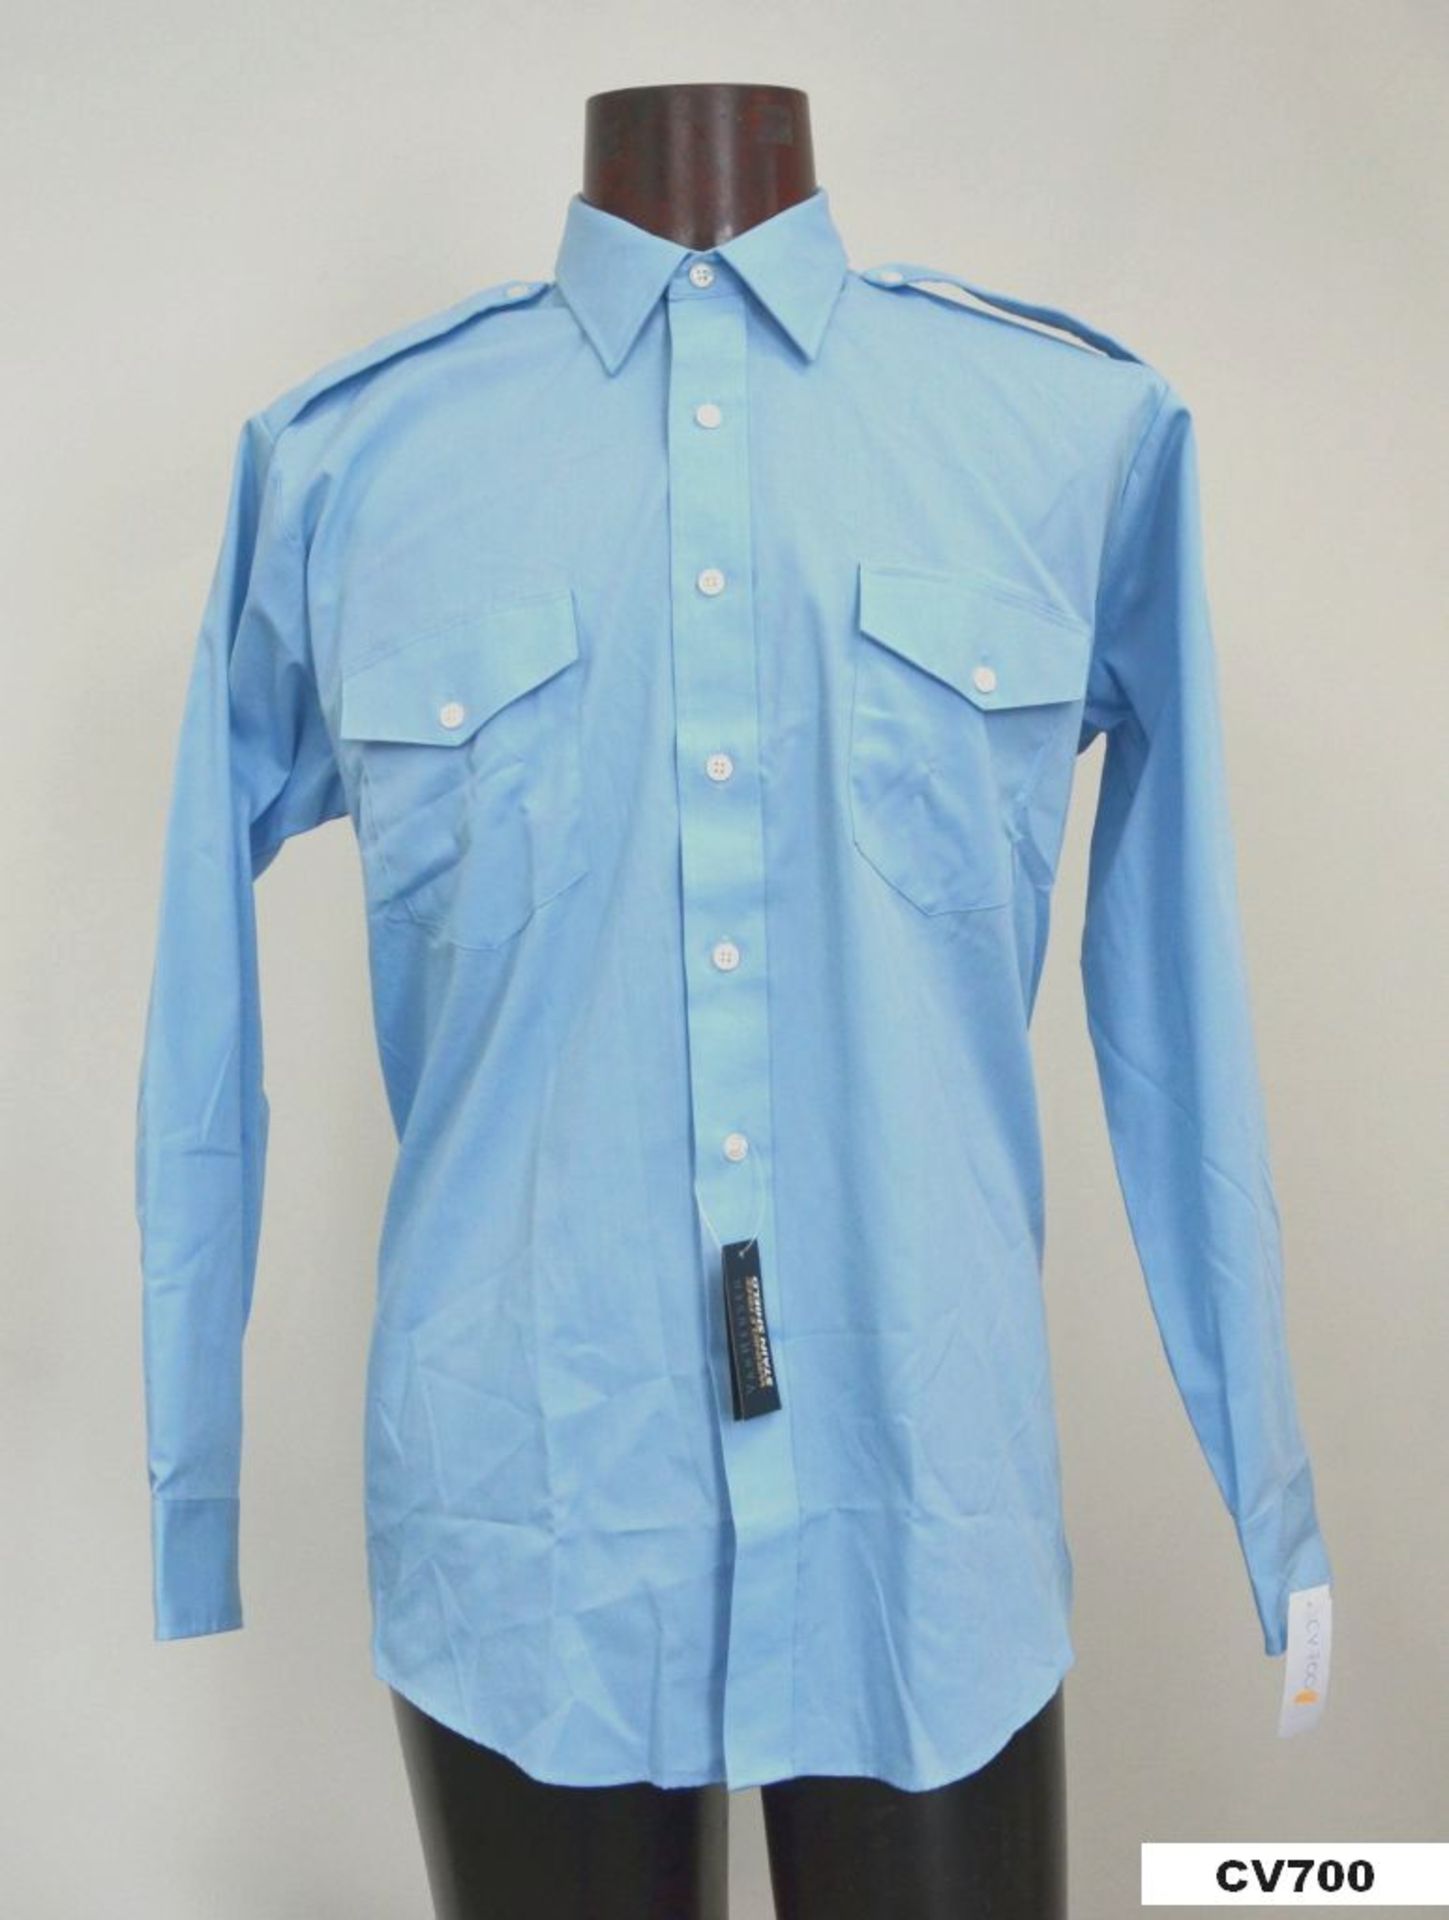 130 x Shirt L/S / Assorted blue and white / CV700